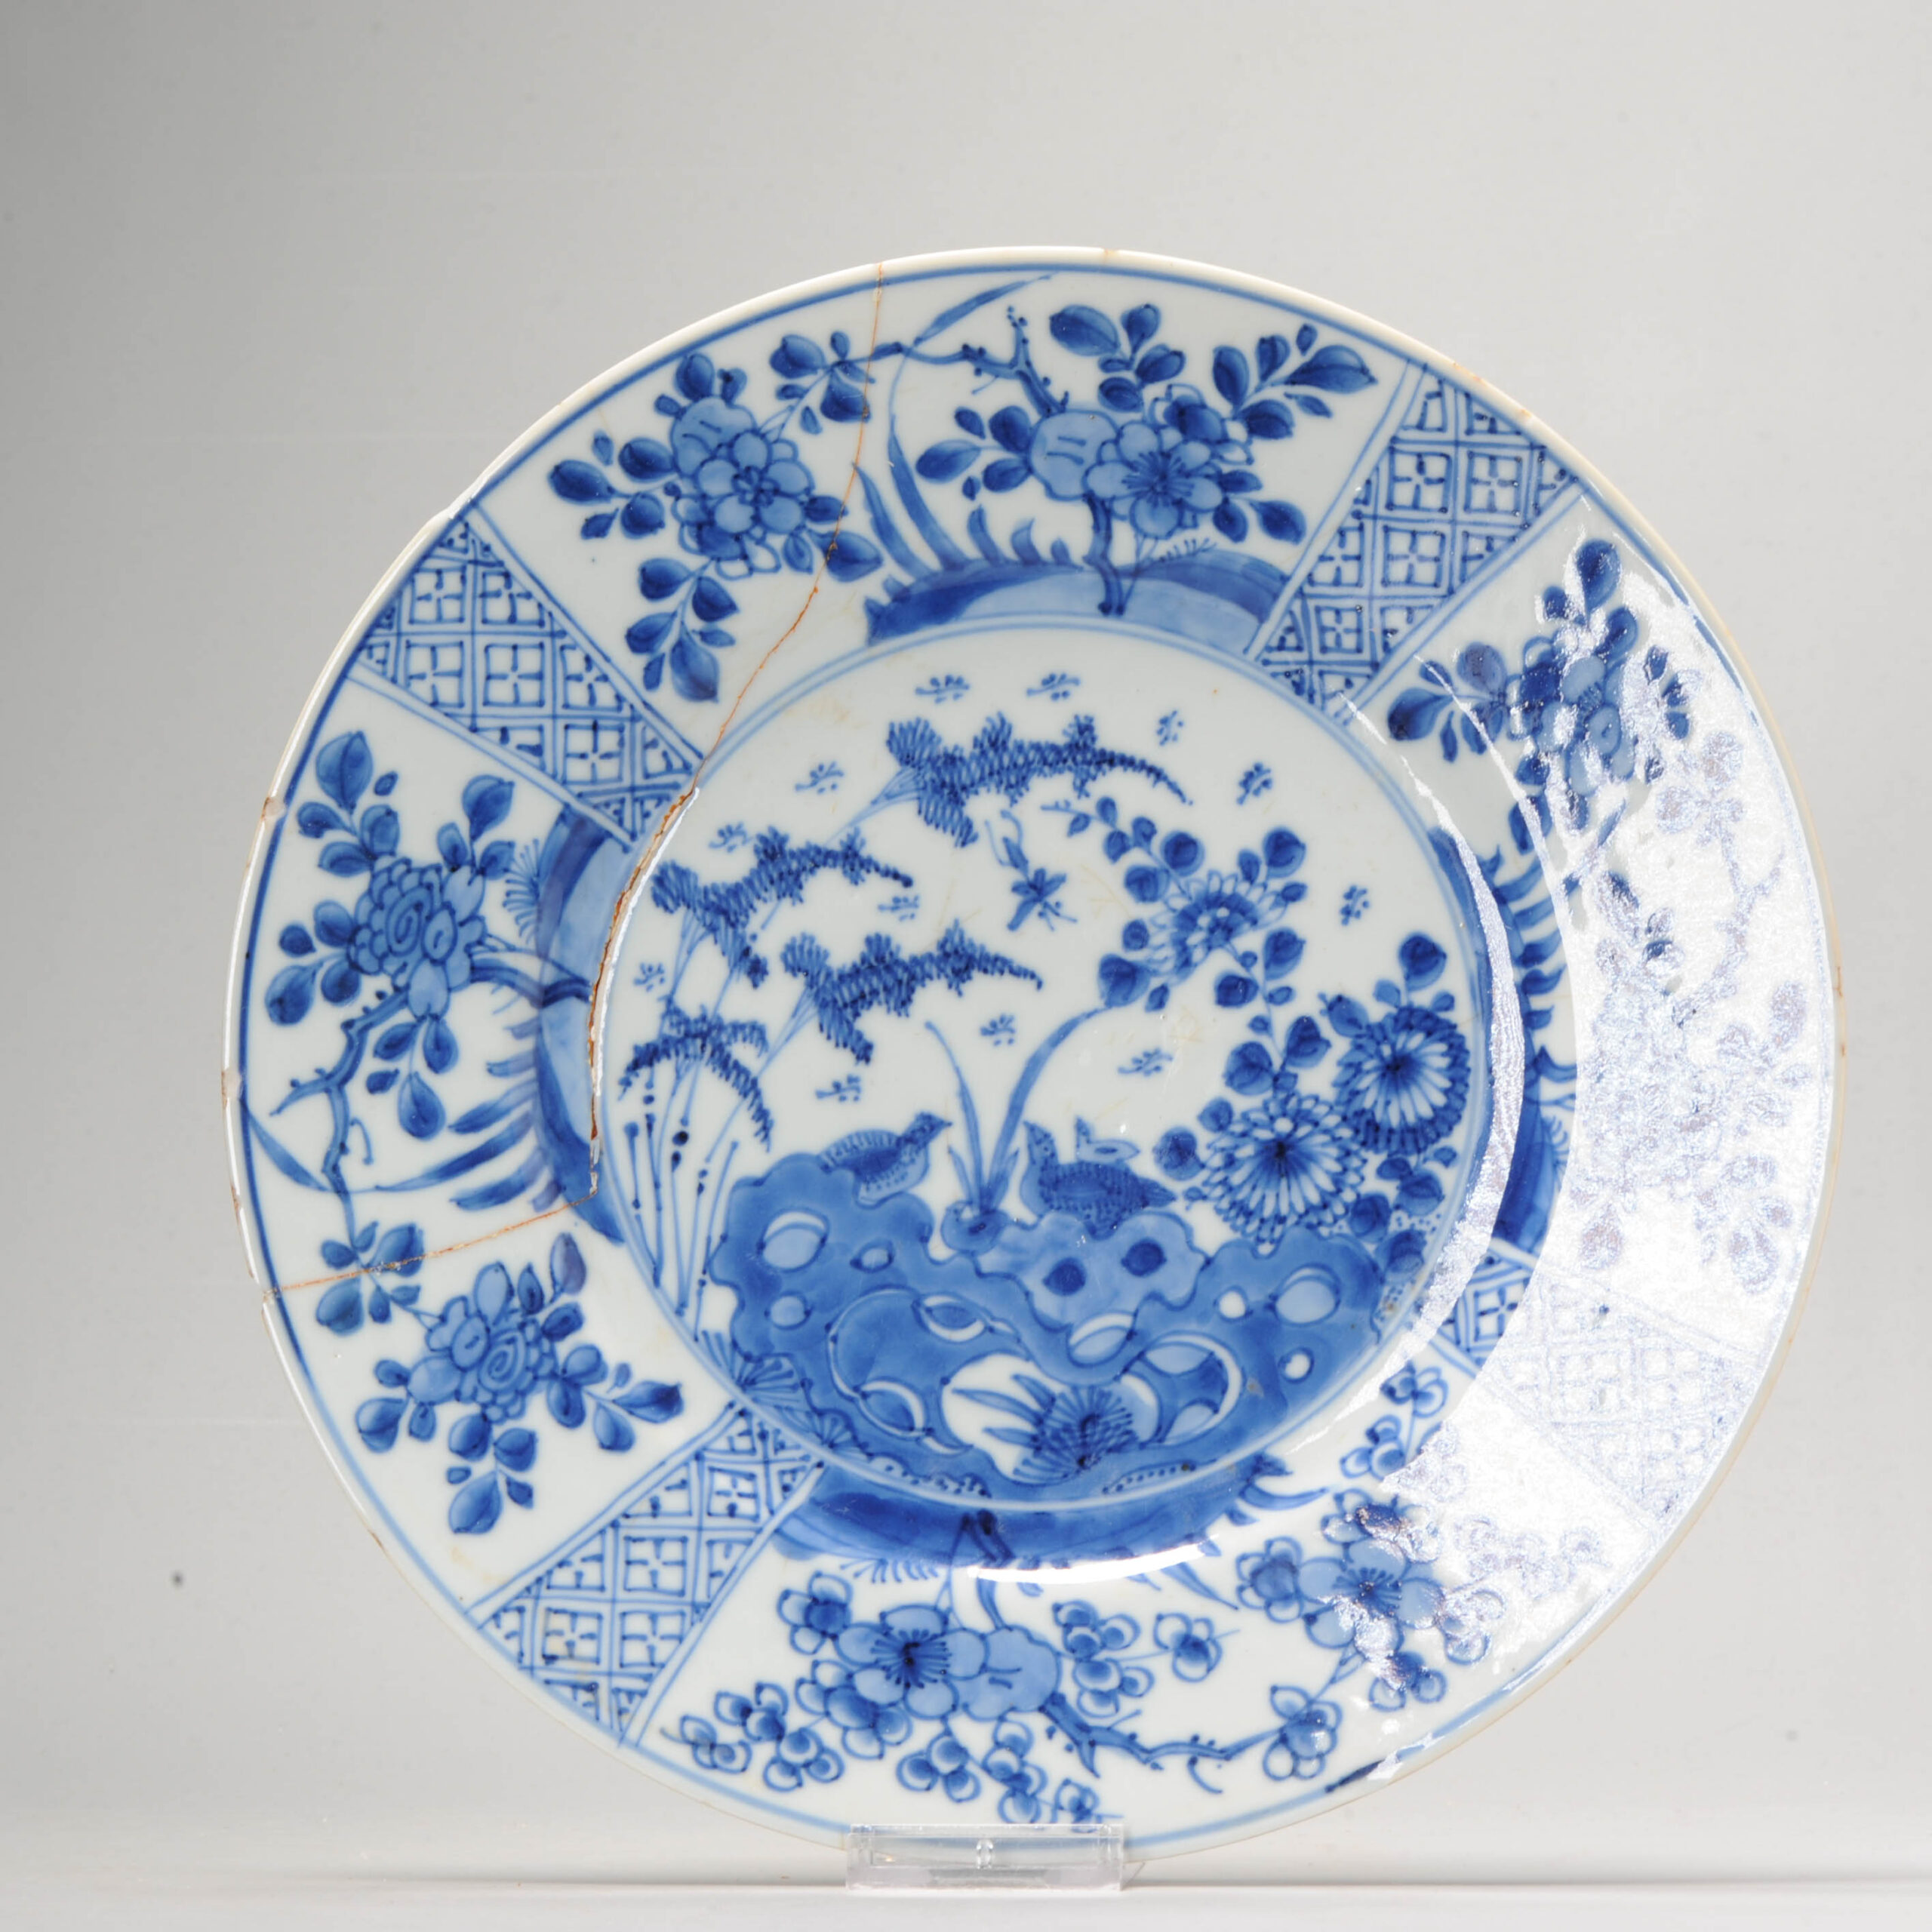 A Quail Garden Scene Kangxi Chinese Porcelain Blue and White Marked Plate 1710- 1730 China